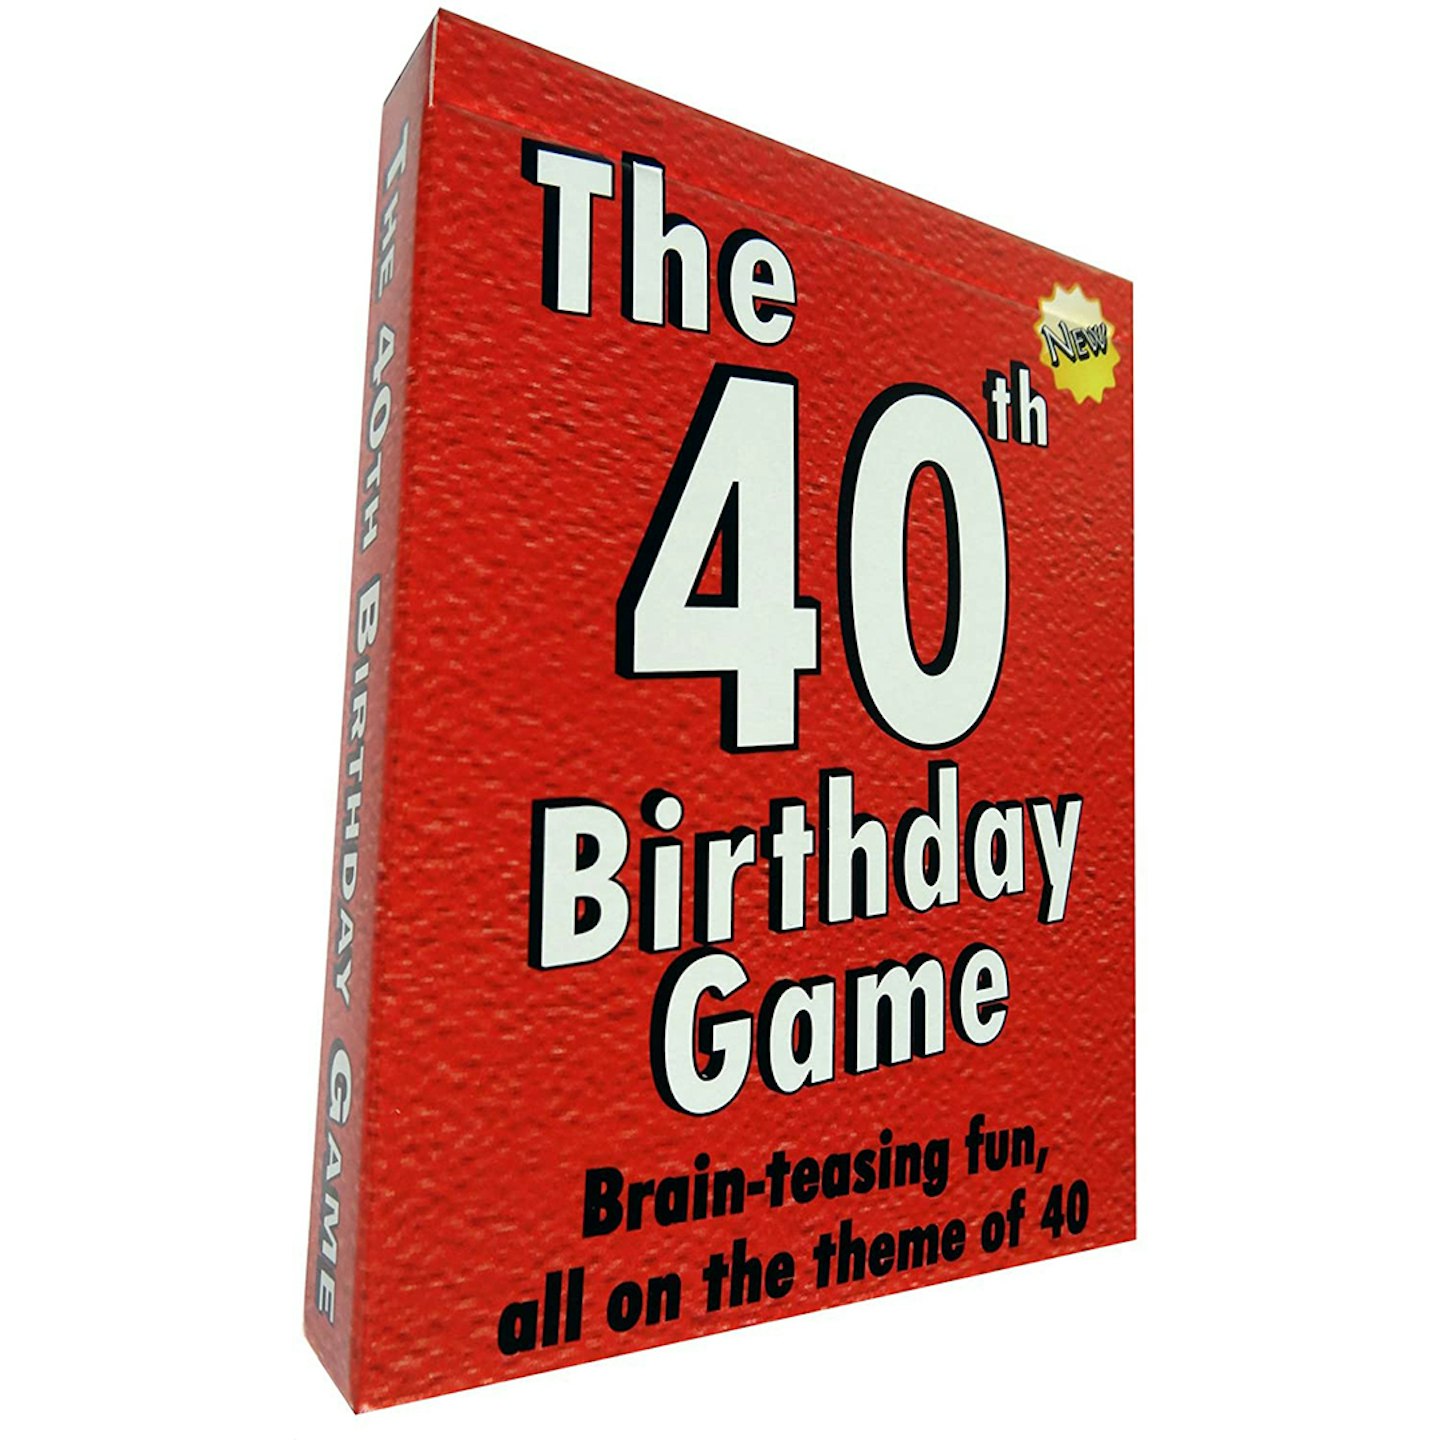 The 40th Birthday Game